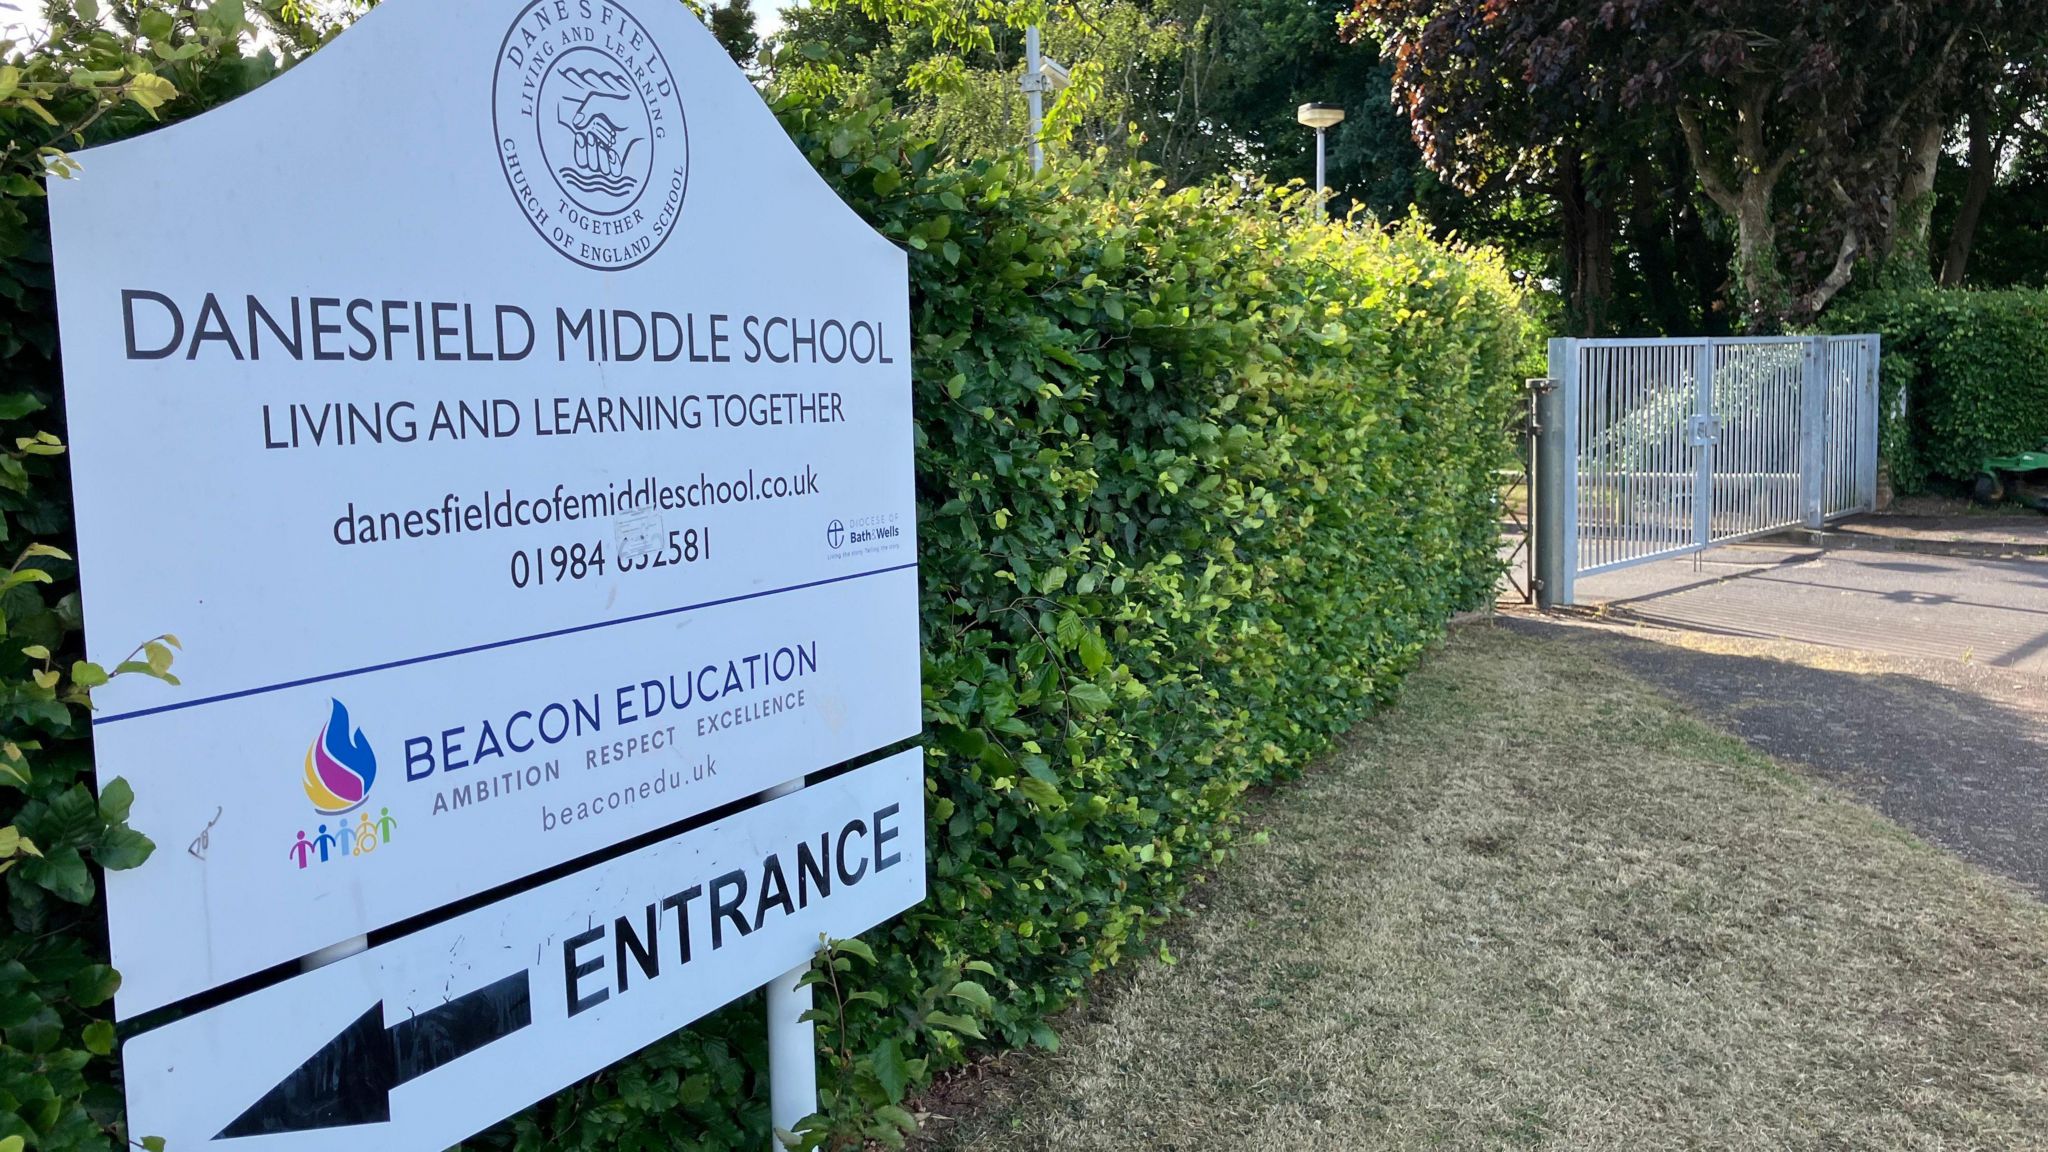 Image of the Danesfield Middle School sign. It is white, and has the logo  at the top. There is also a logo for Beacon Education. There is an arrow pointing left to the entrance at the bottom. 